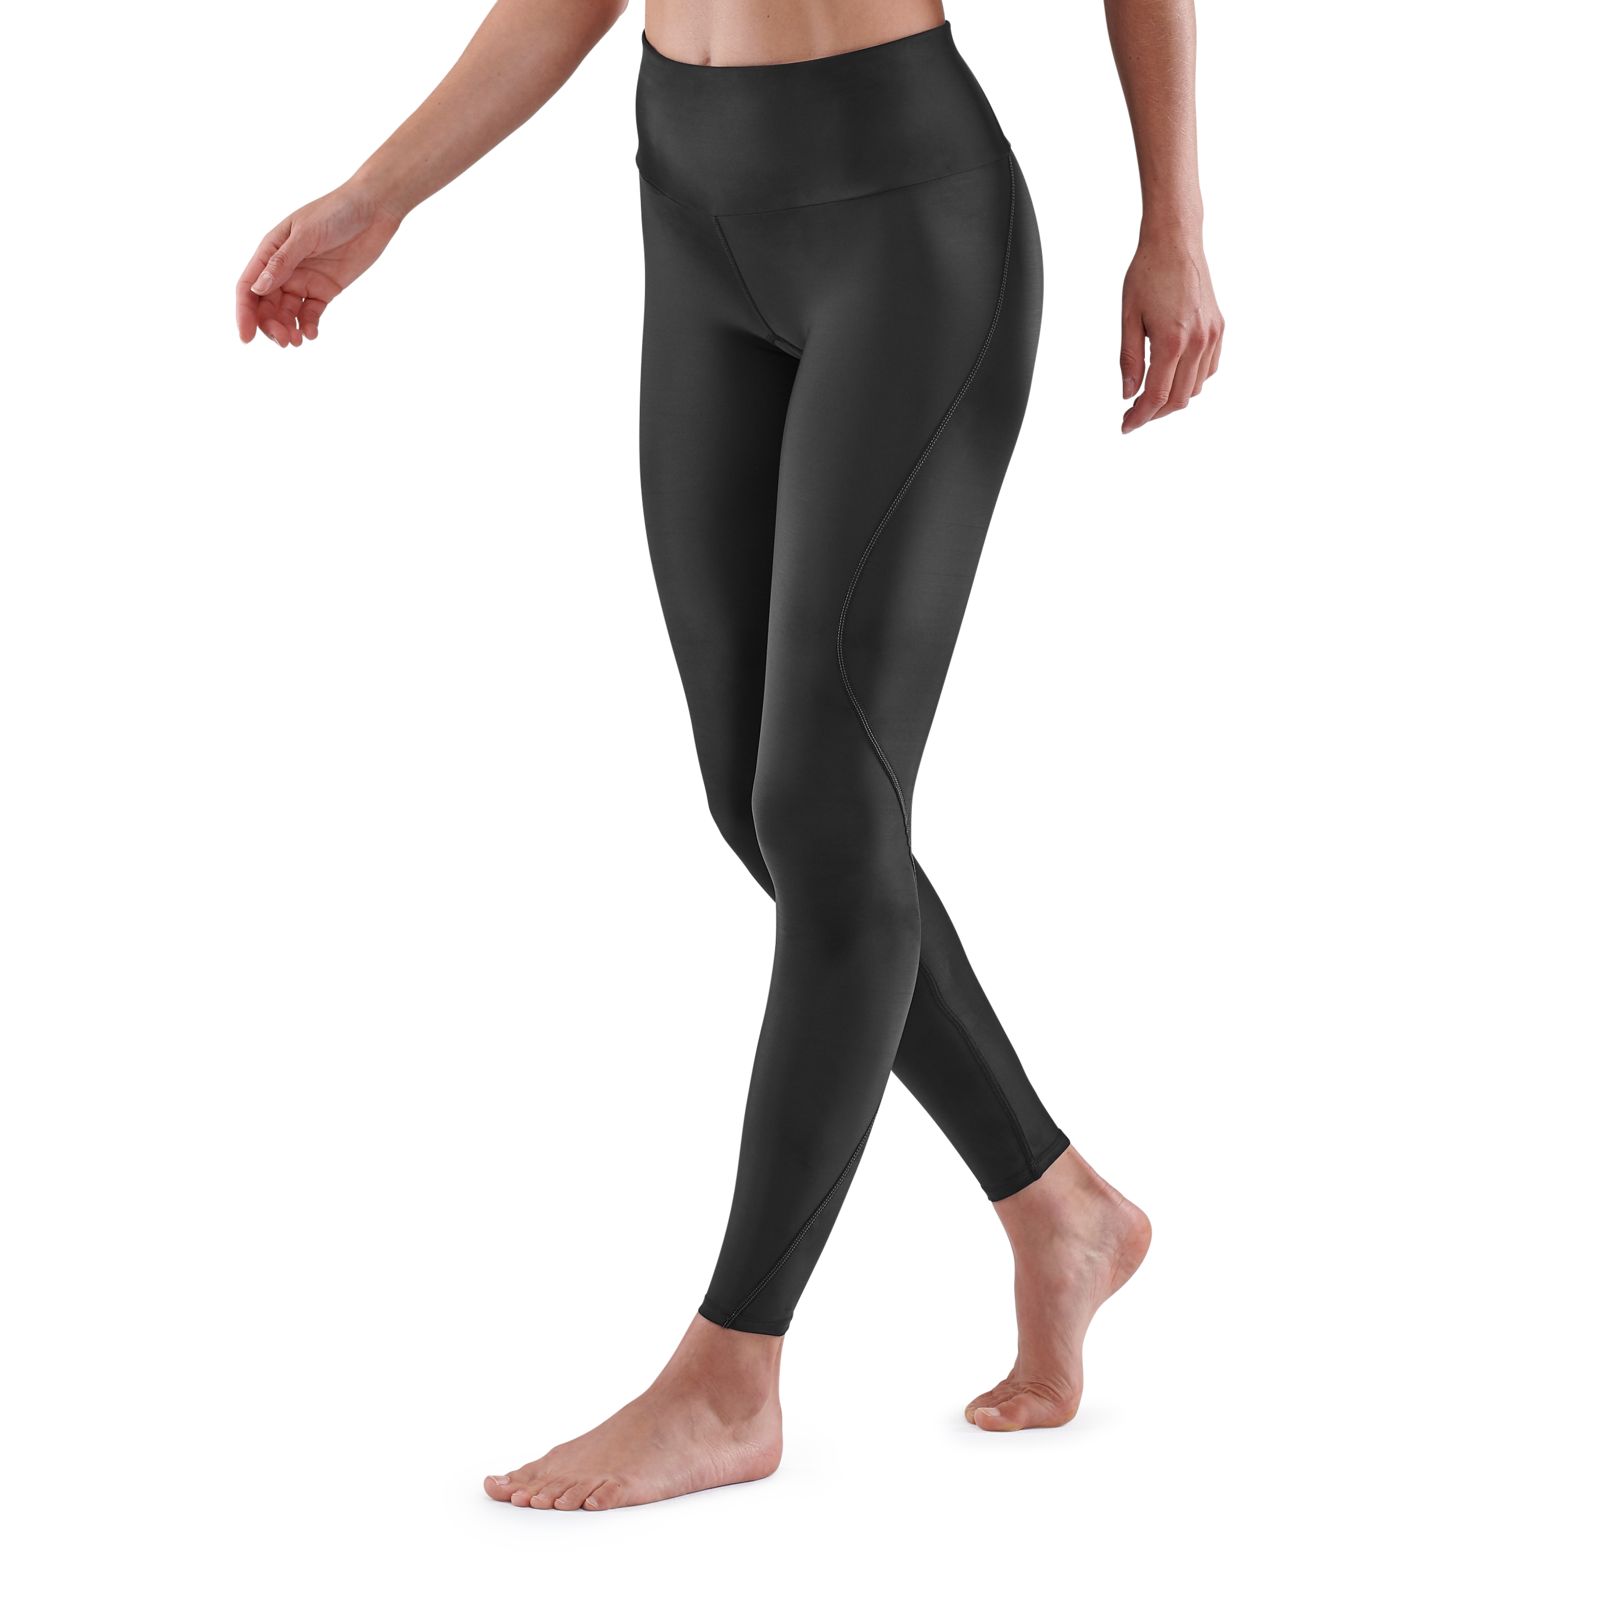  Customer reviews: Constantly Varied Gear Women's Workout  Leggings - Compression Tights (Medium, Black & White Skulls)